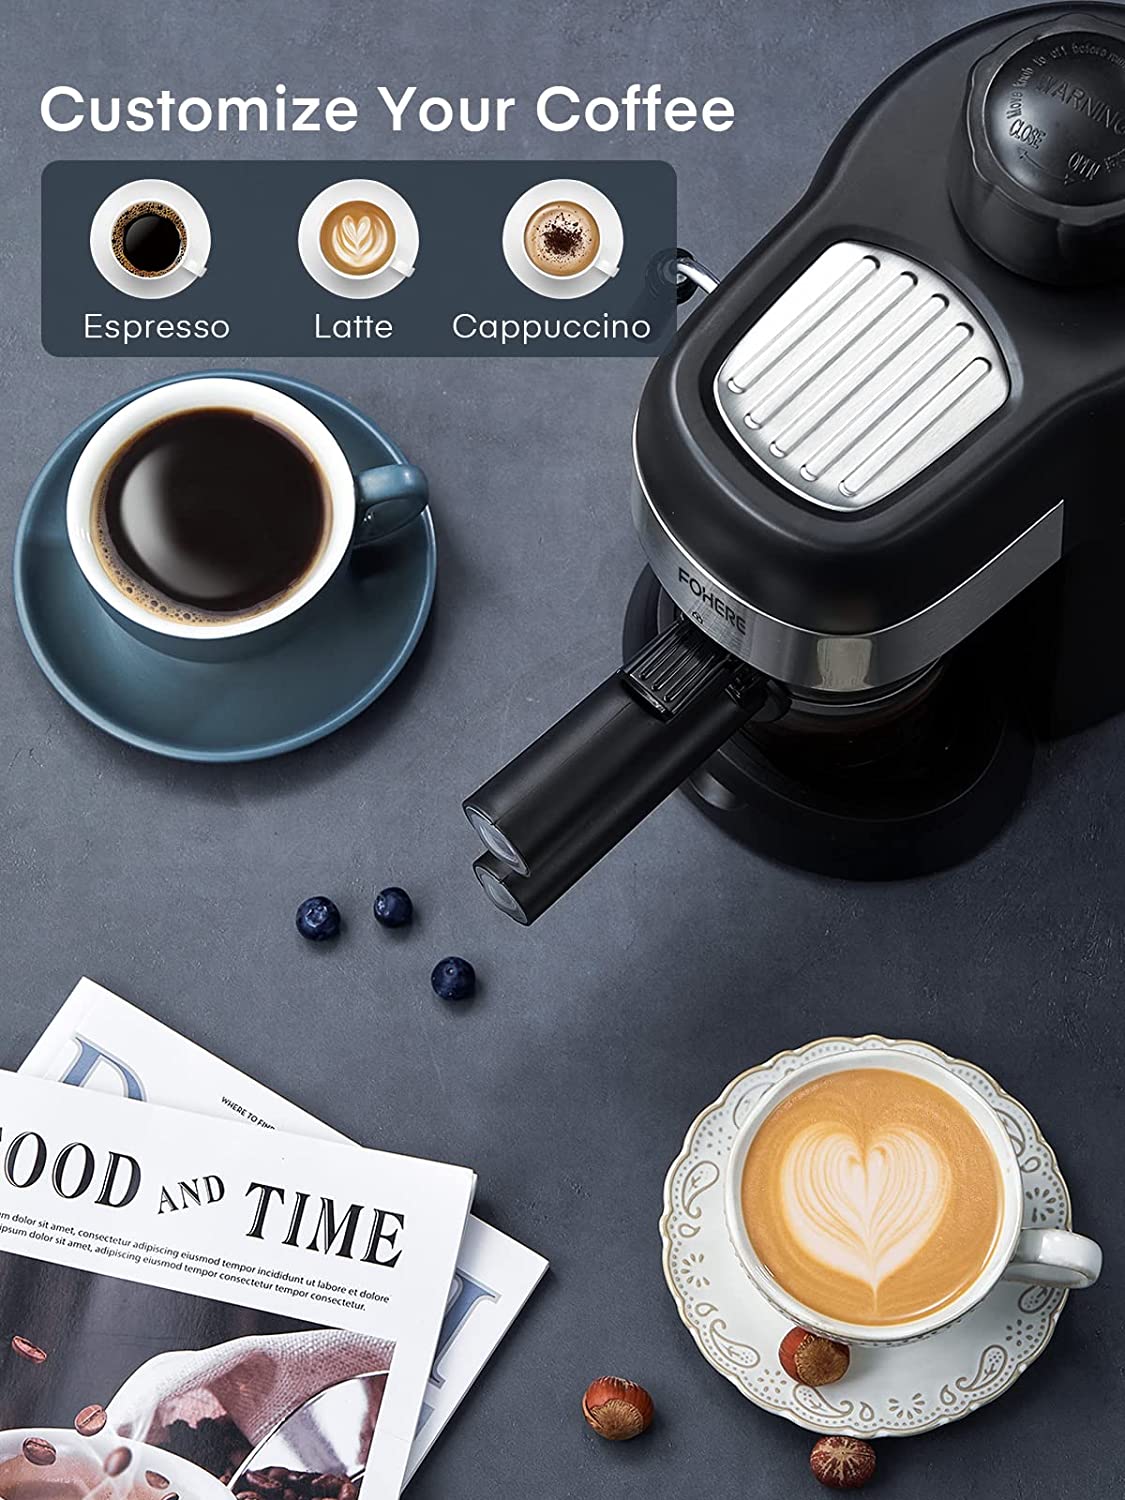 customize your coffee, FOHERE Espresso Machine, 3.5 Bar 4 Cup Steam Espresso Machine, Espresso and Cappuccino Maker with Milk Frother and Carafe, Professional Compact Coffee Machine for Espresso, Cappuccino, Latte and Mocha